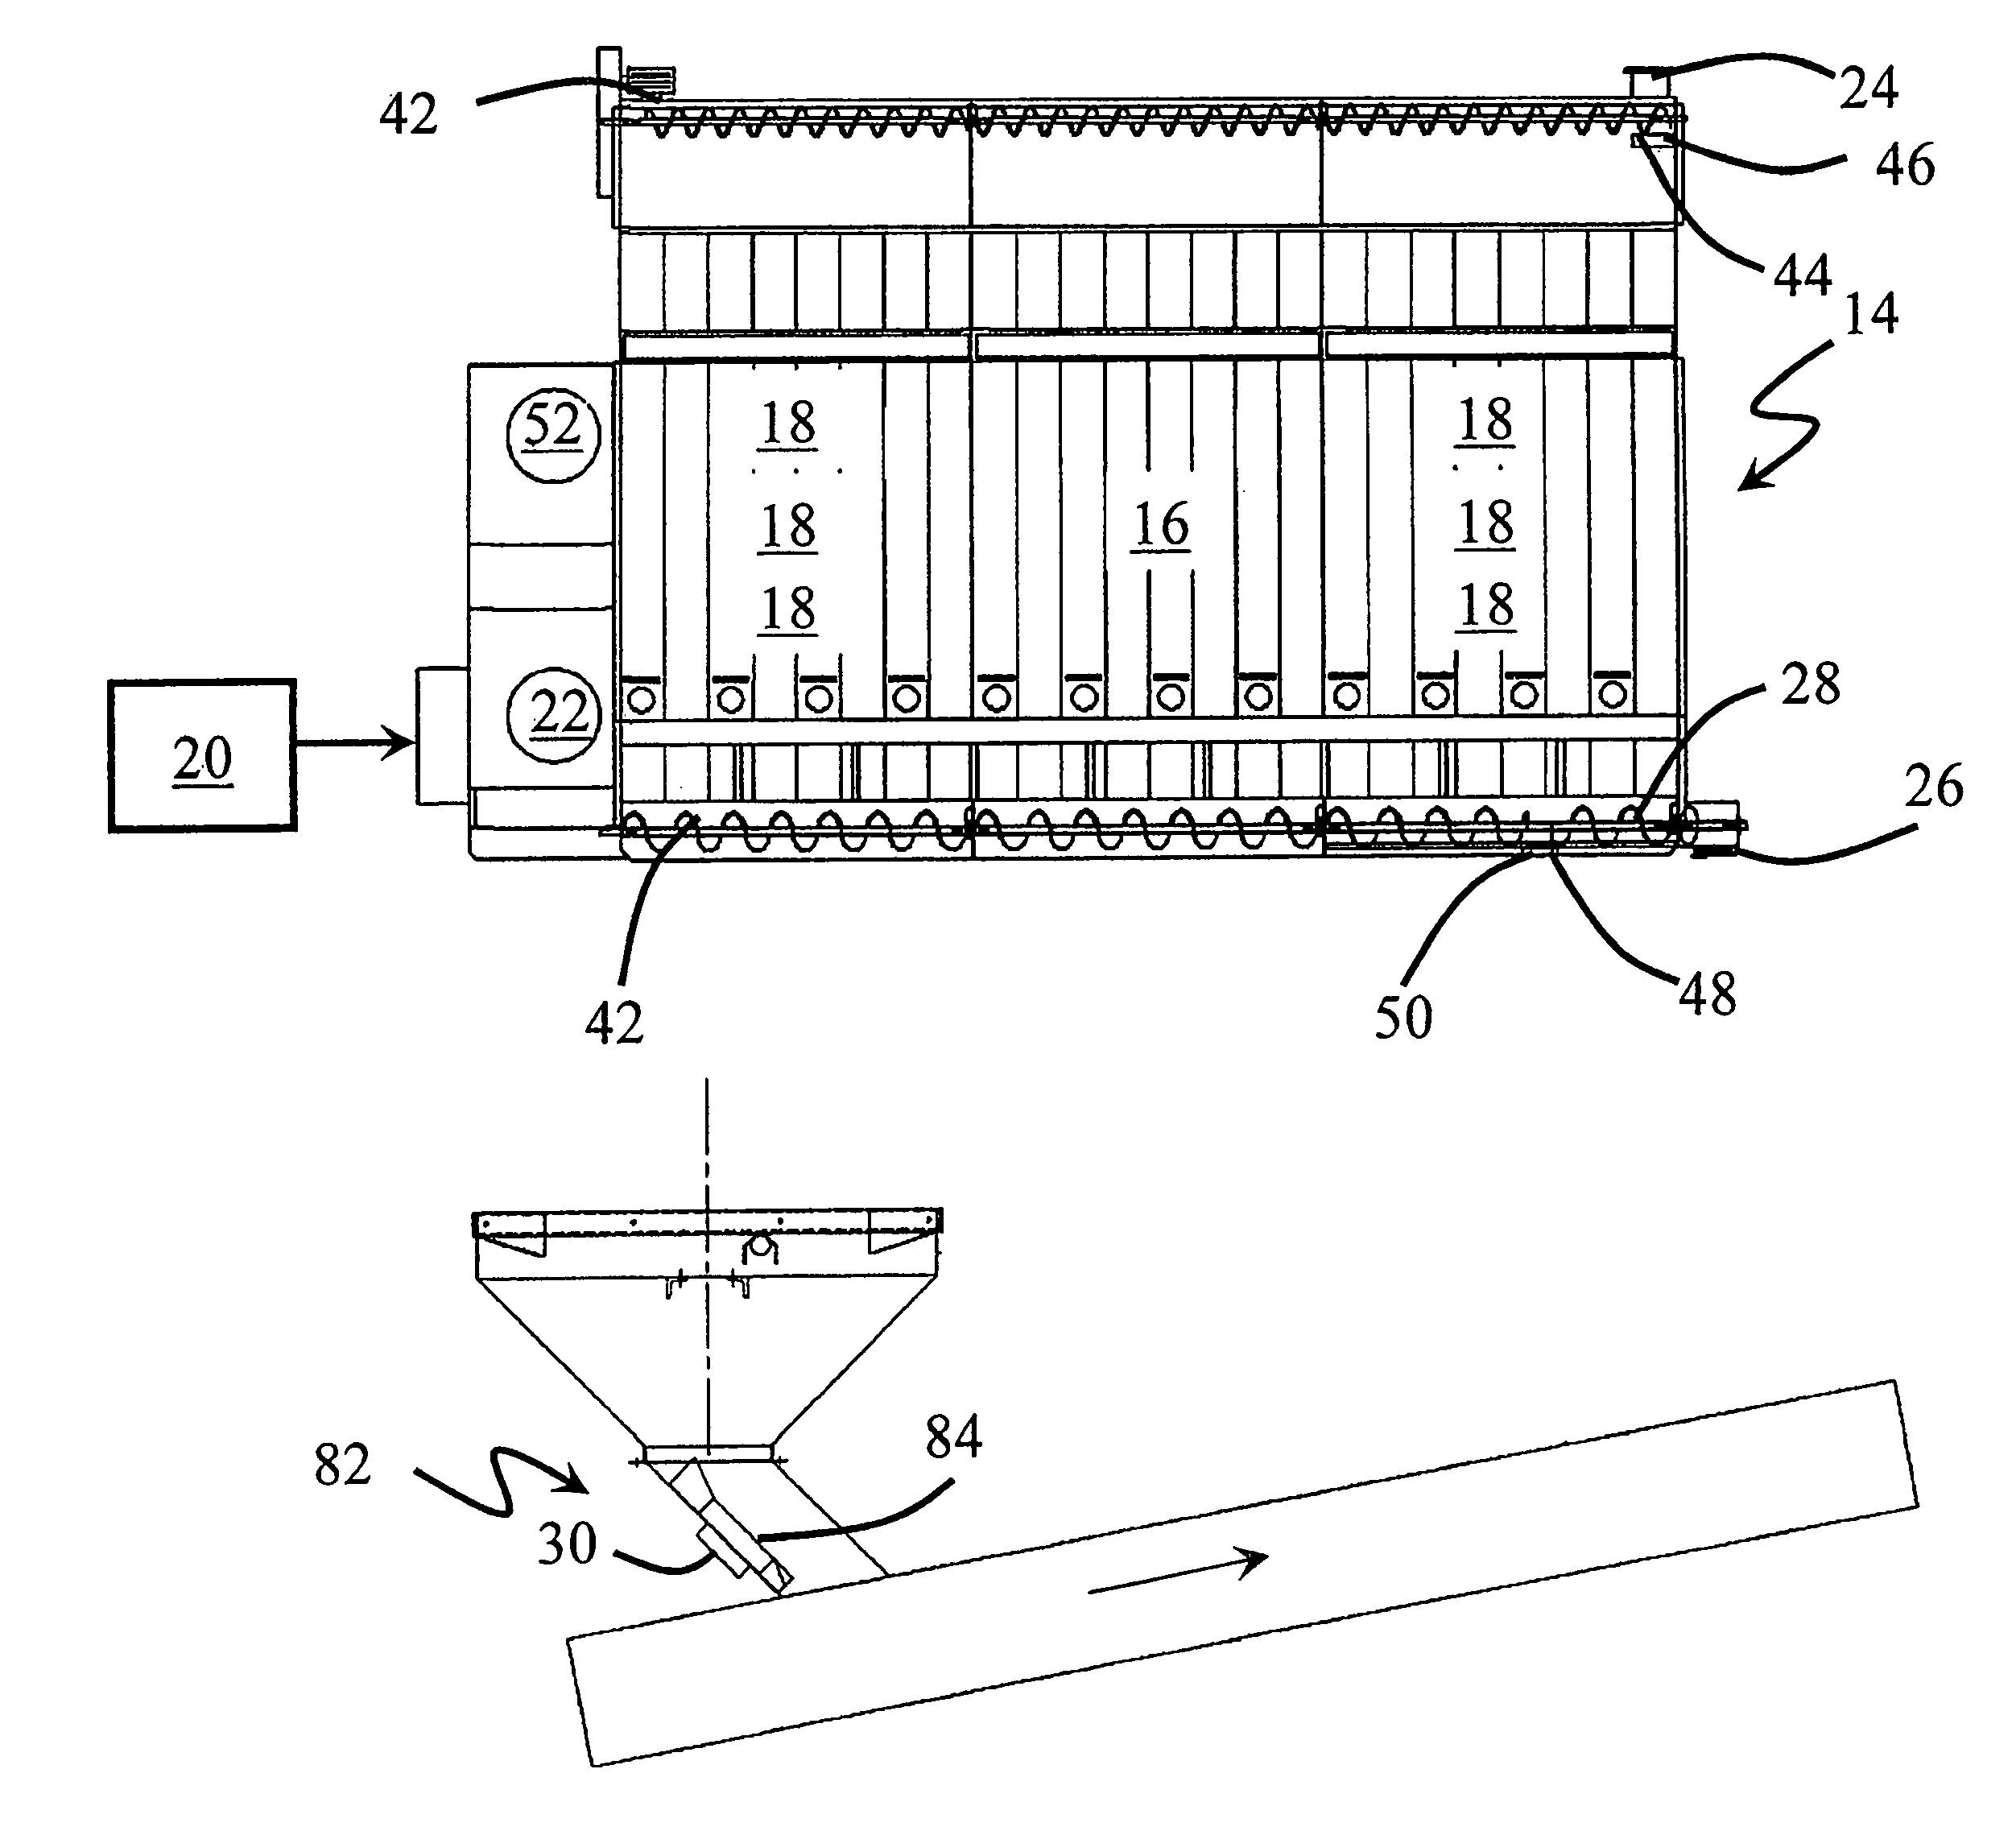 Apparatus and method for reducing a moisture content of an agricultural product